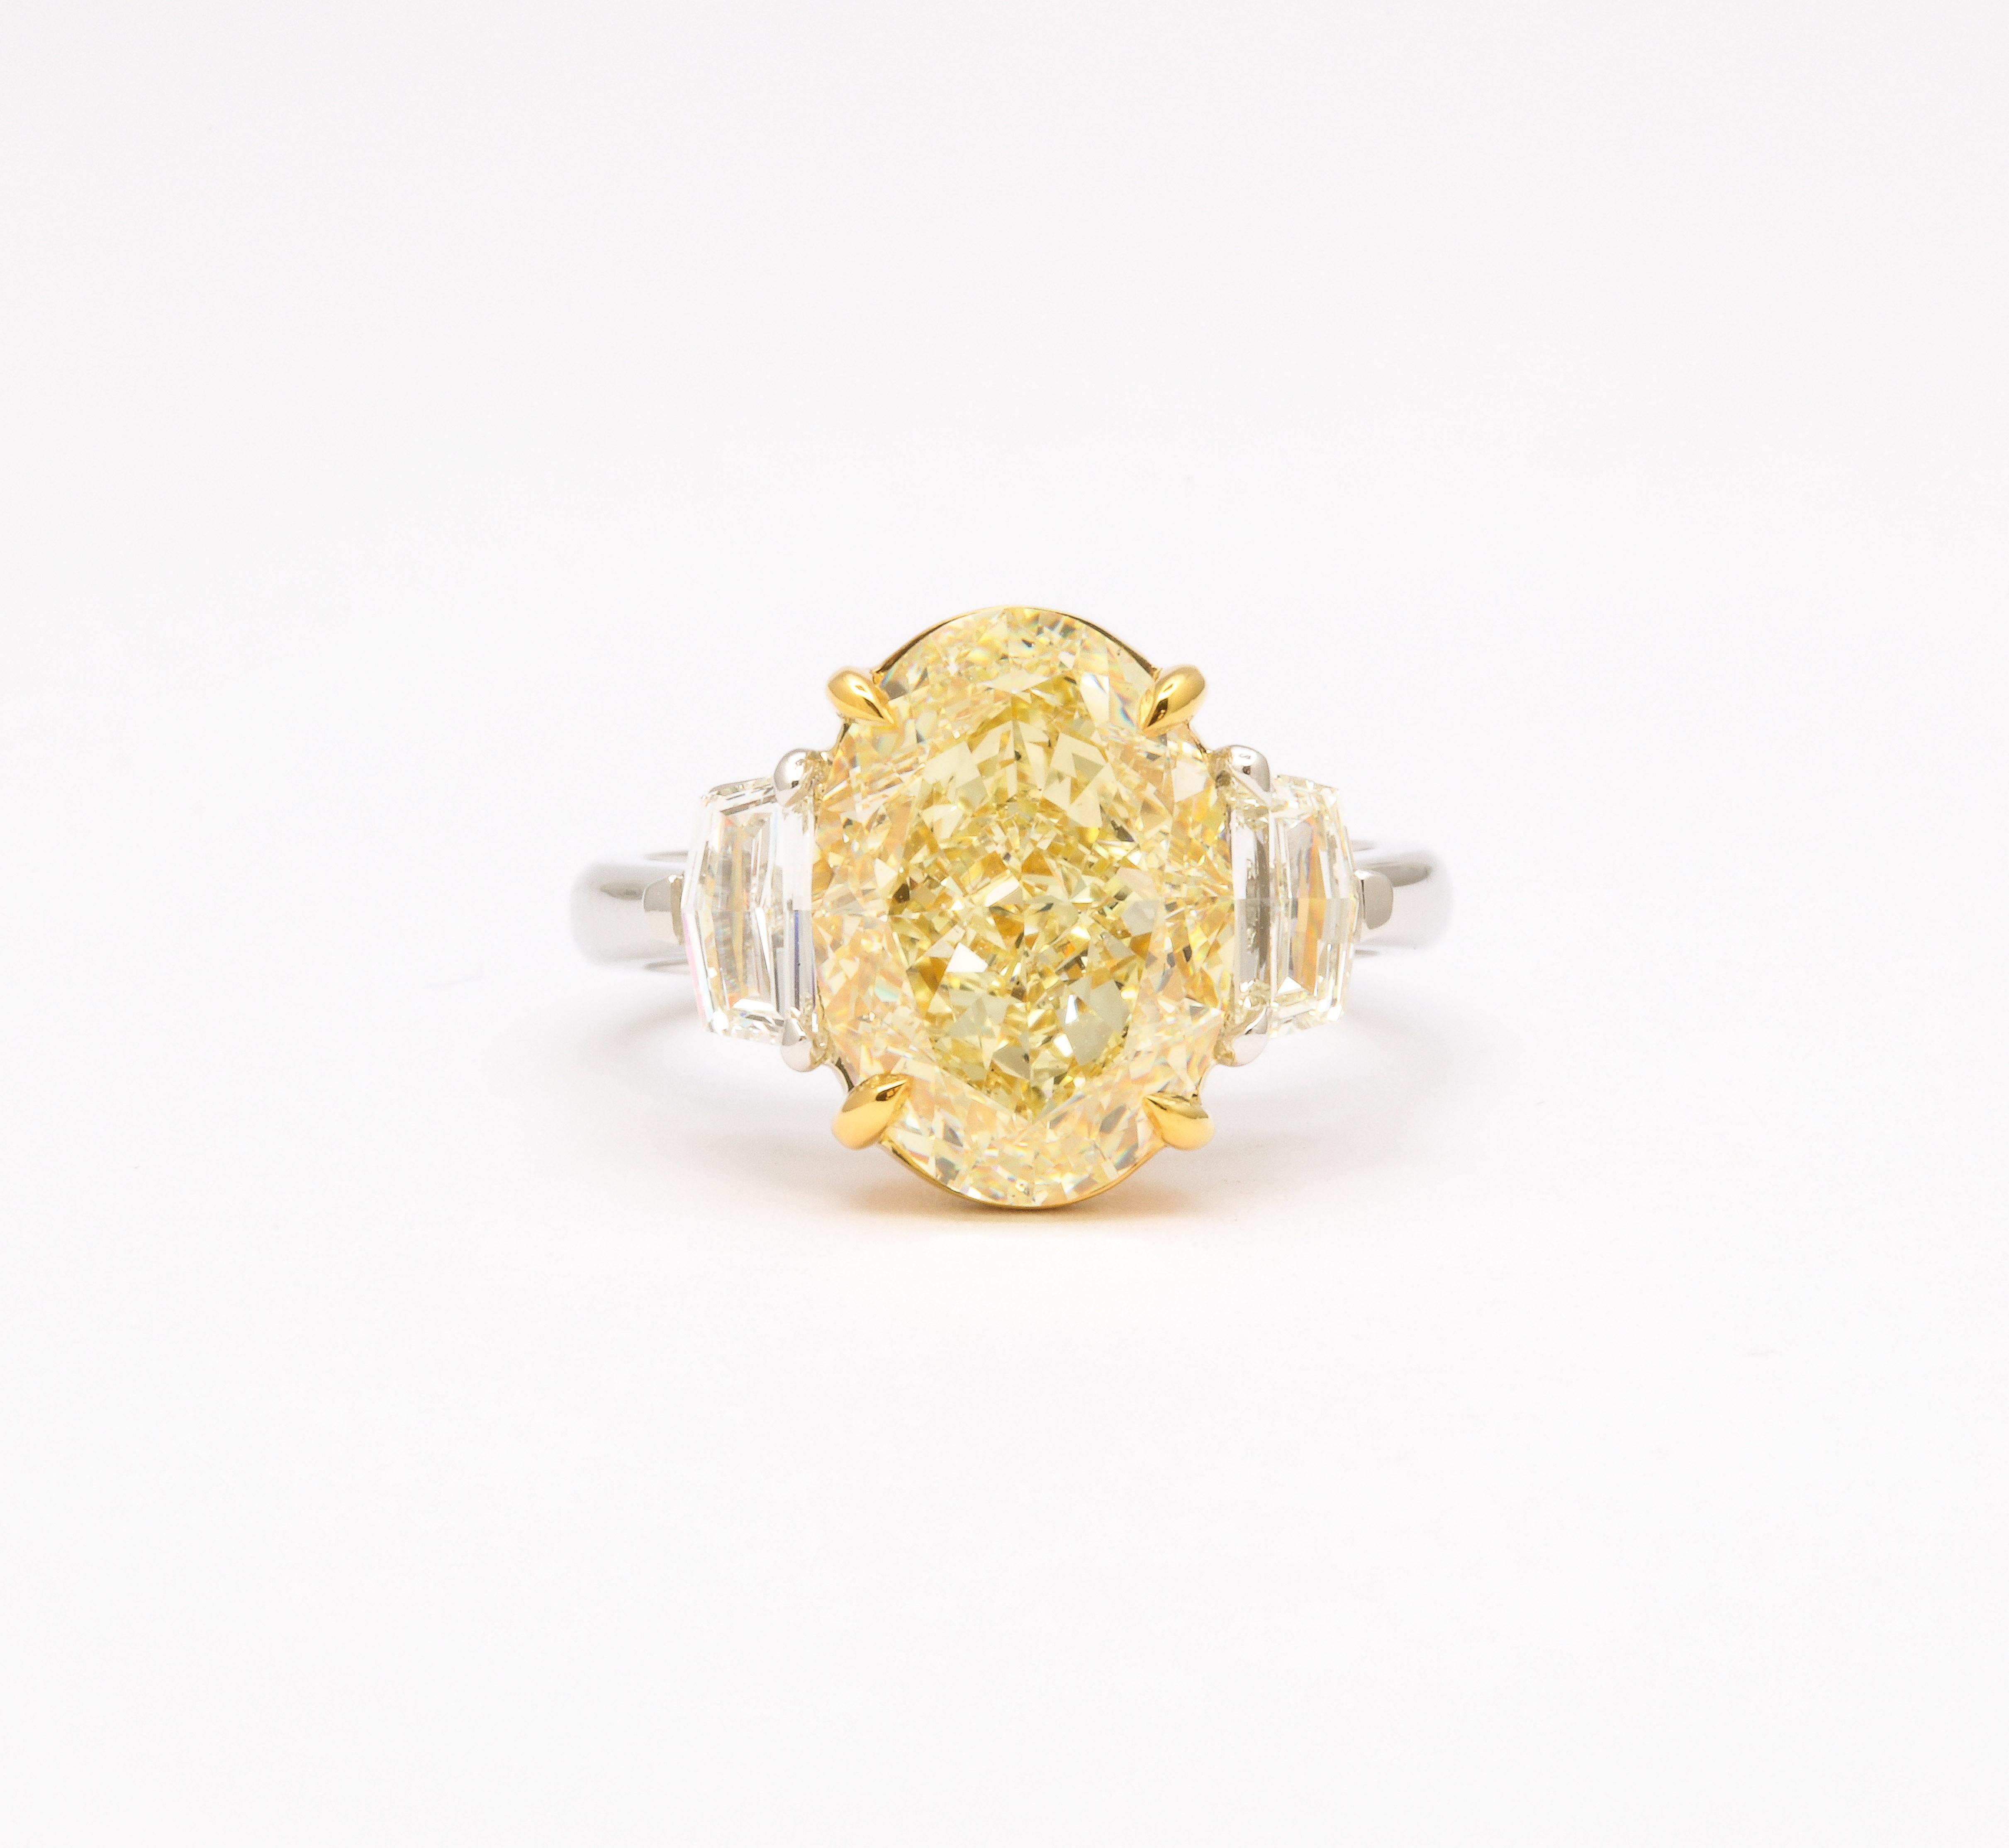 Oval Cut 6 Carat Oval Yellow Diamond Ring Gia Certified For Sale